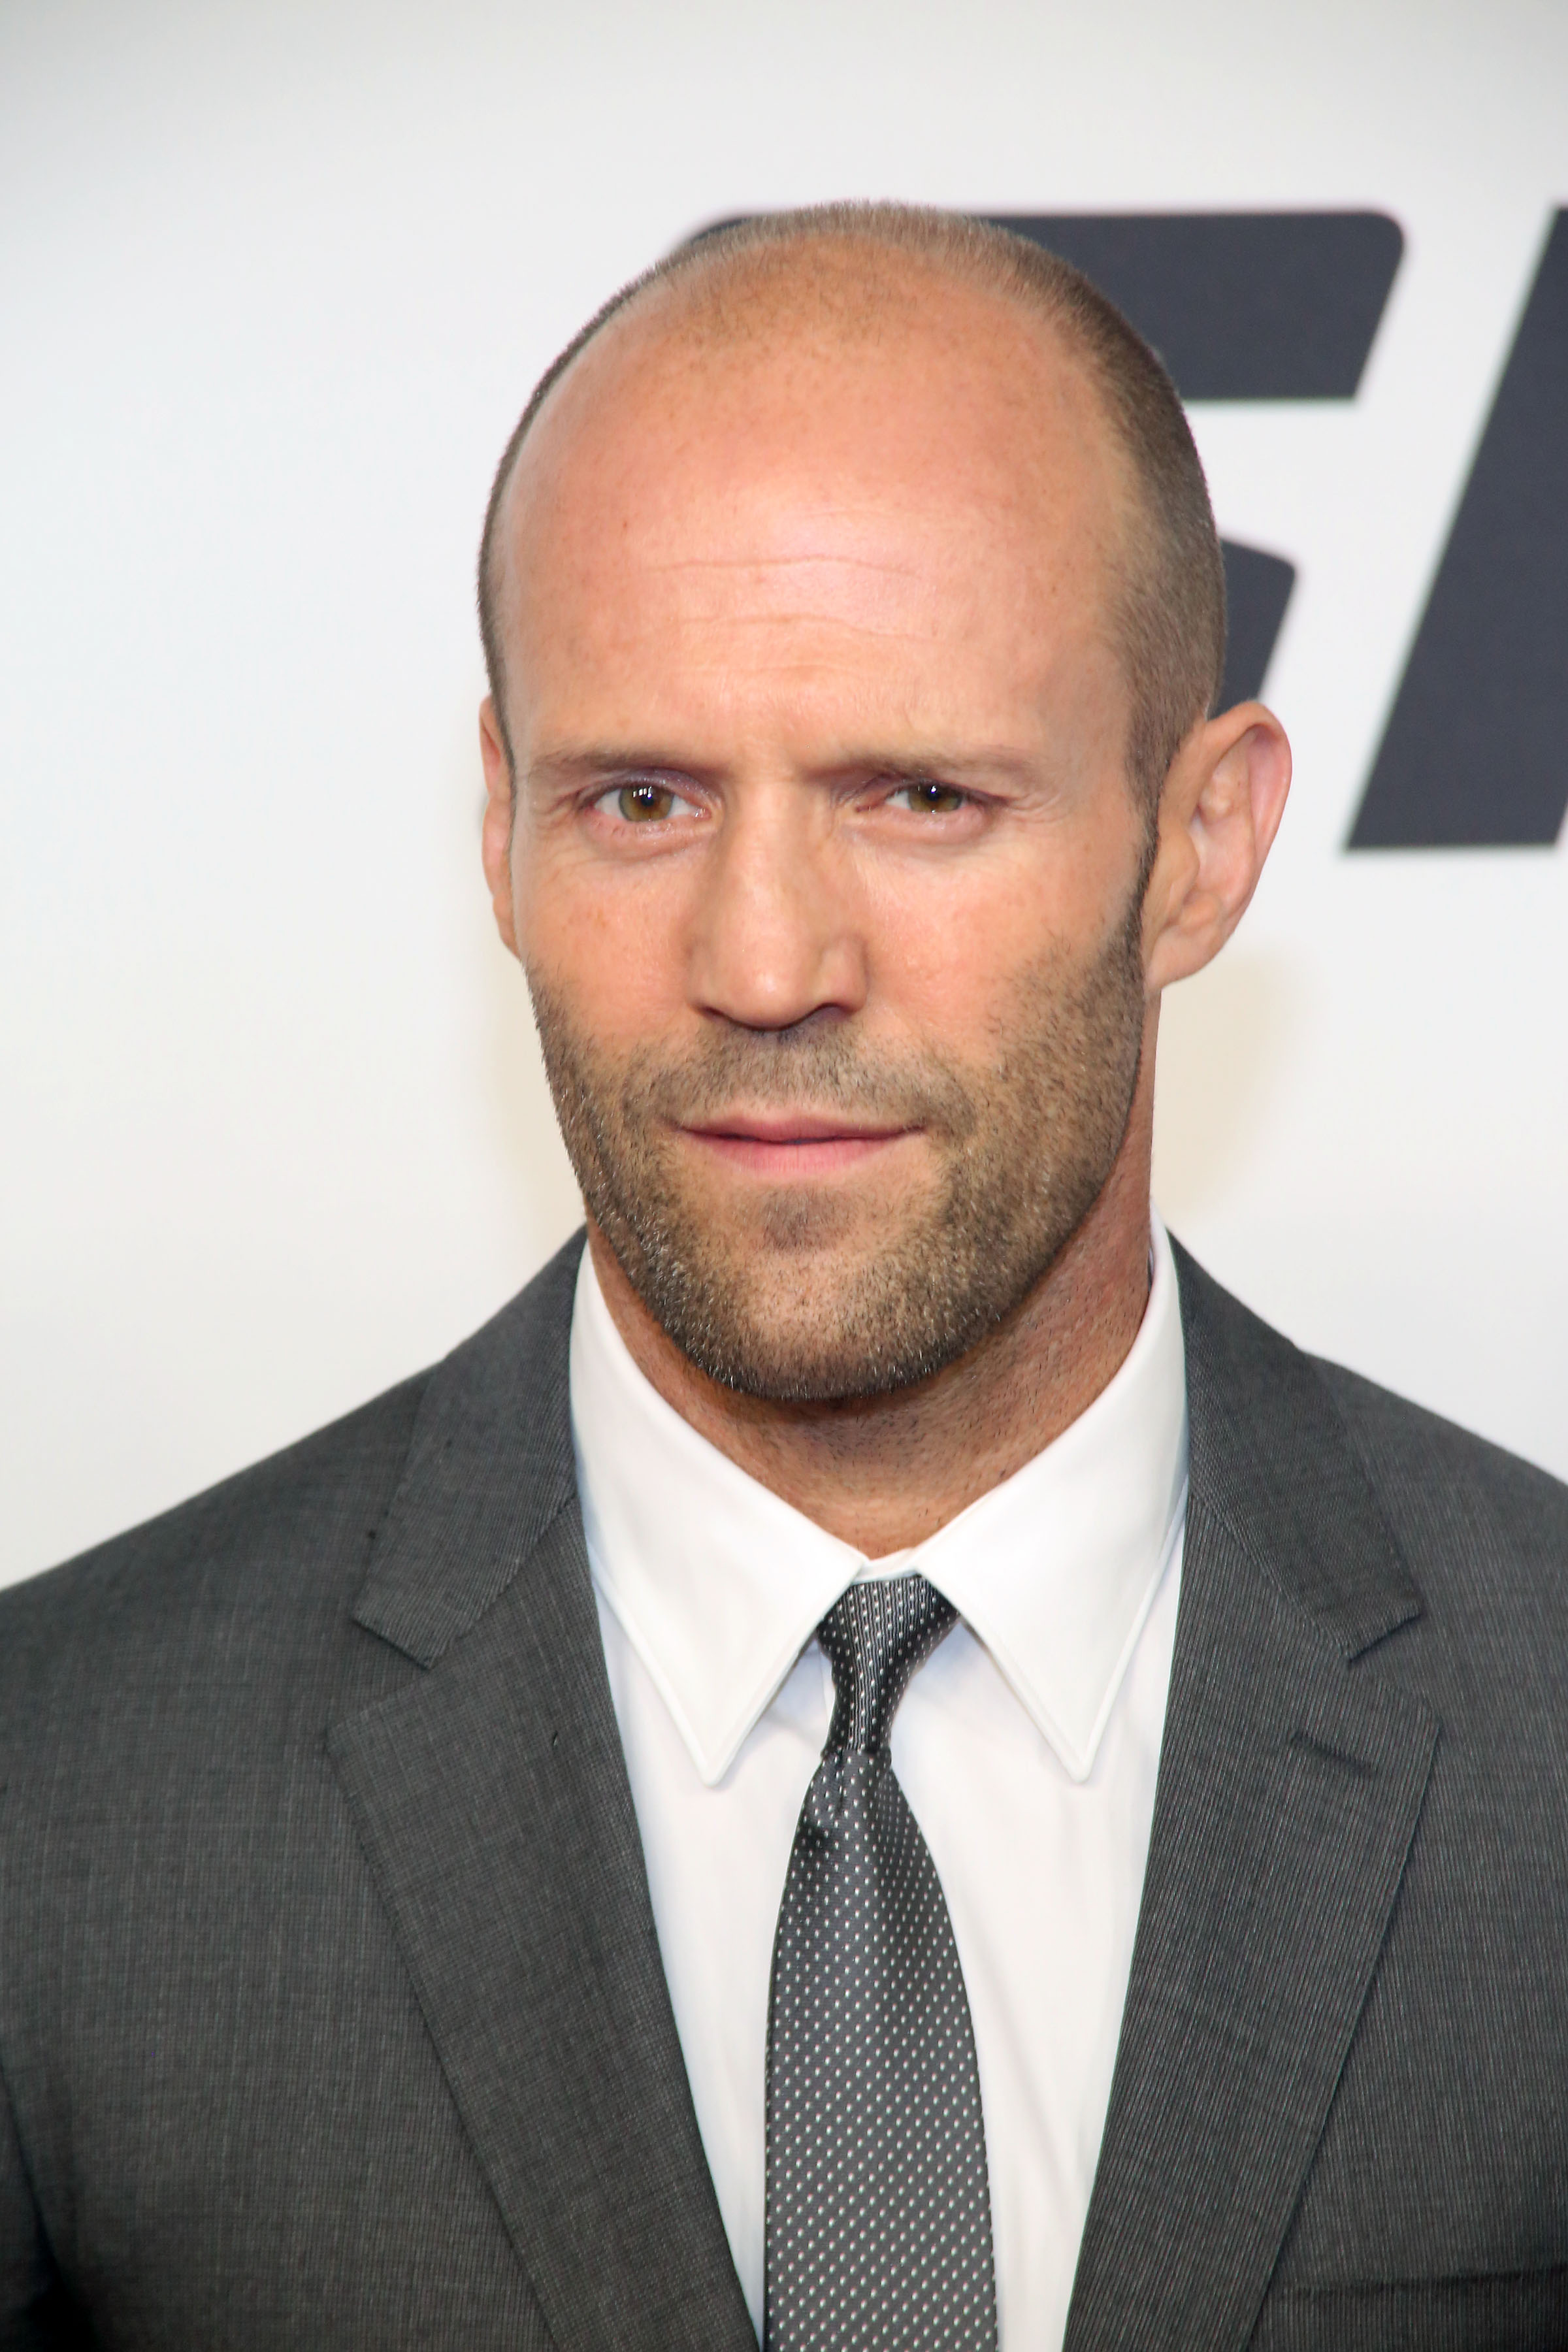 Jason Statham at the New York Premiere of "Spy" in New York City on June 1, 2015. (Sylvain Gaboury—PatrickMcmullan.com/AP)